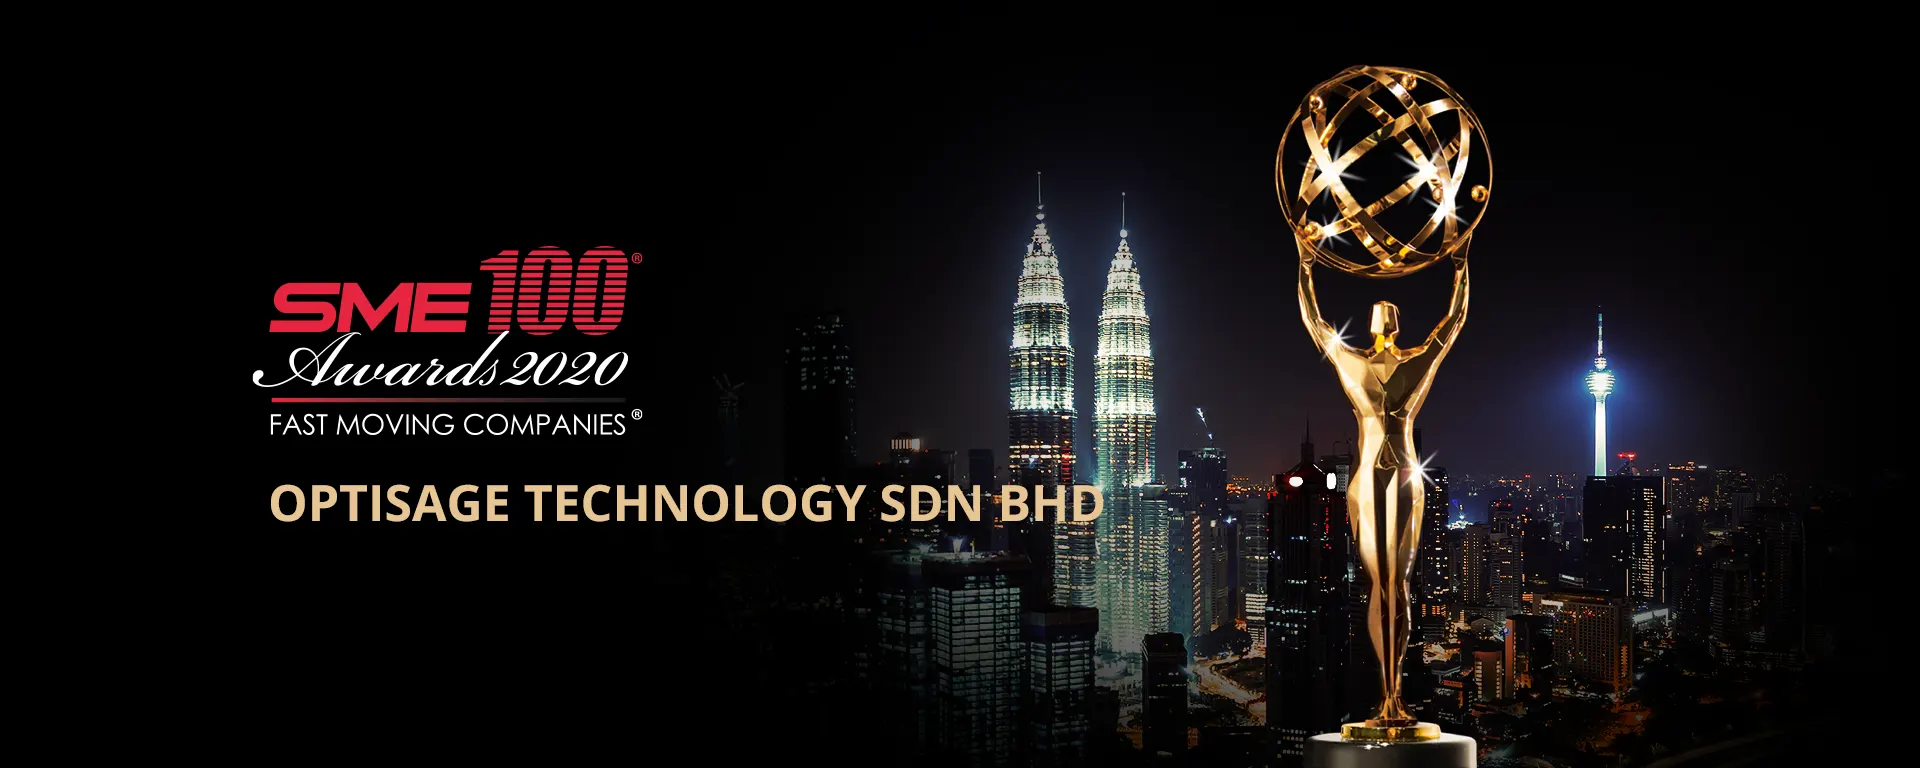 Optisage Technology Sdn Bhd - SME100 Awards 2020 Fast Moving Companies